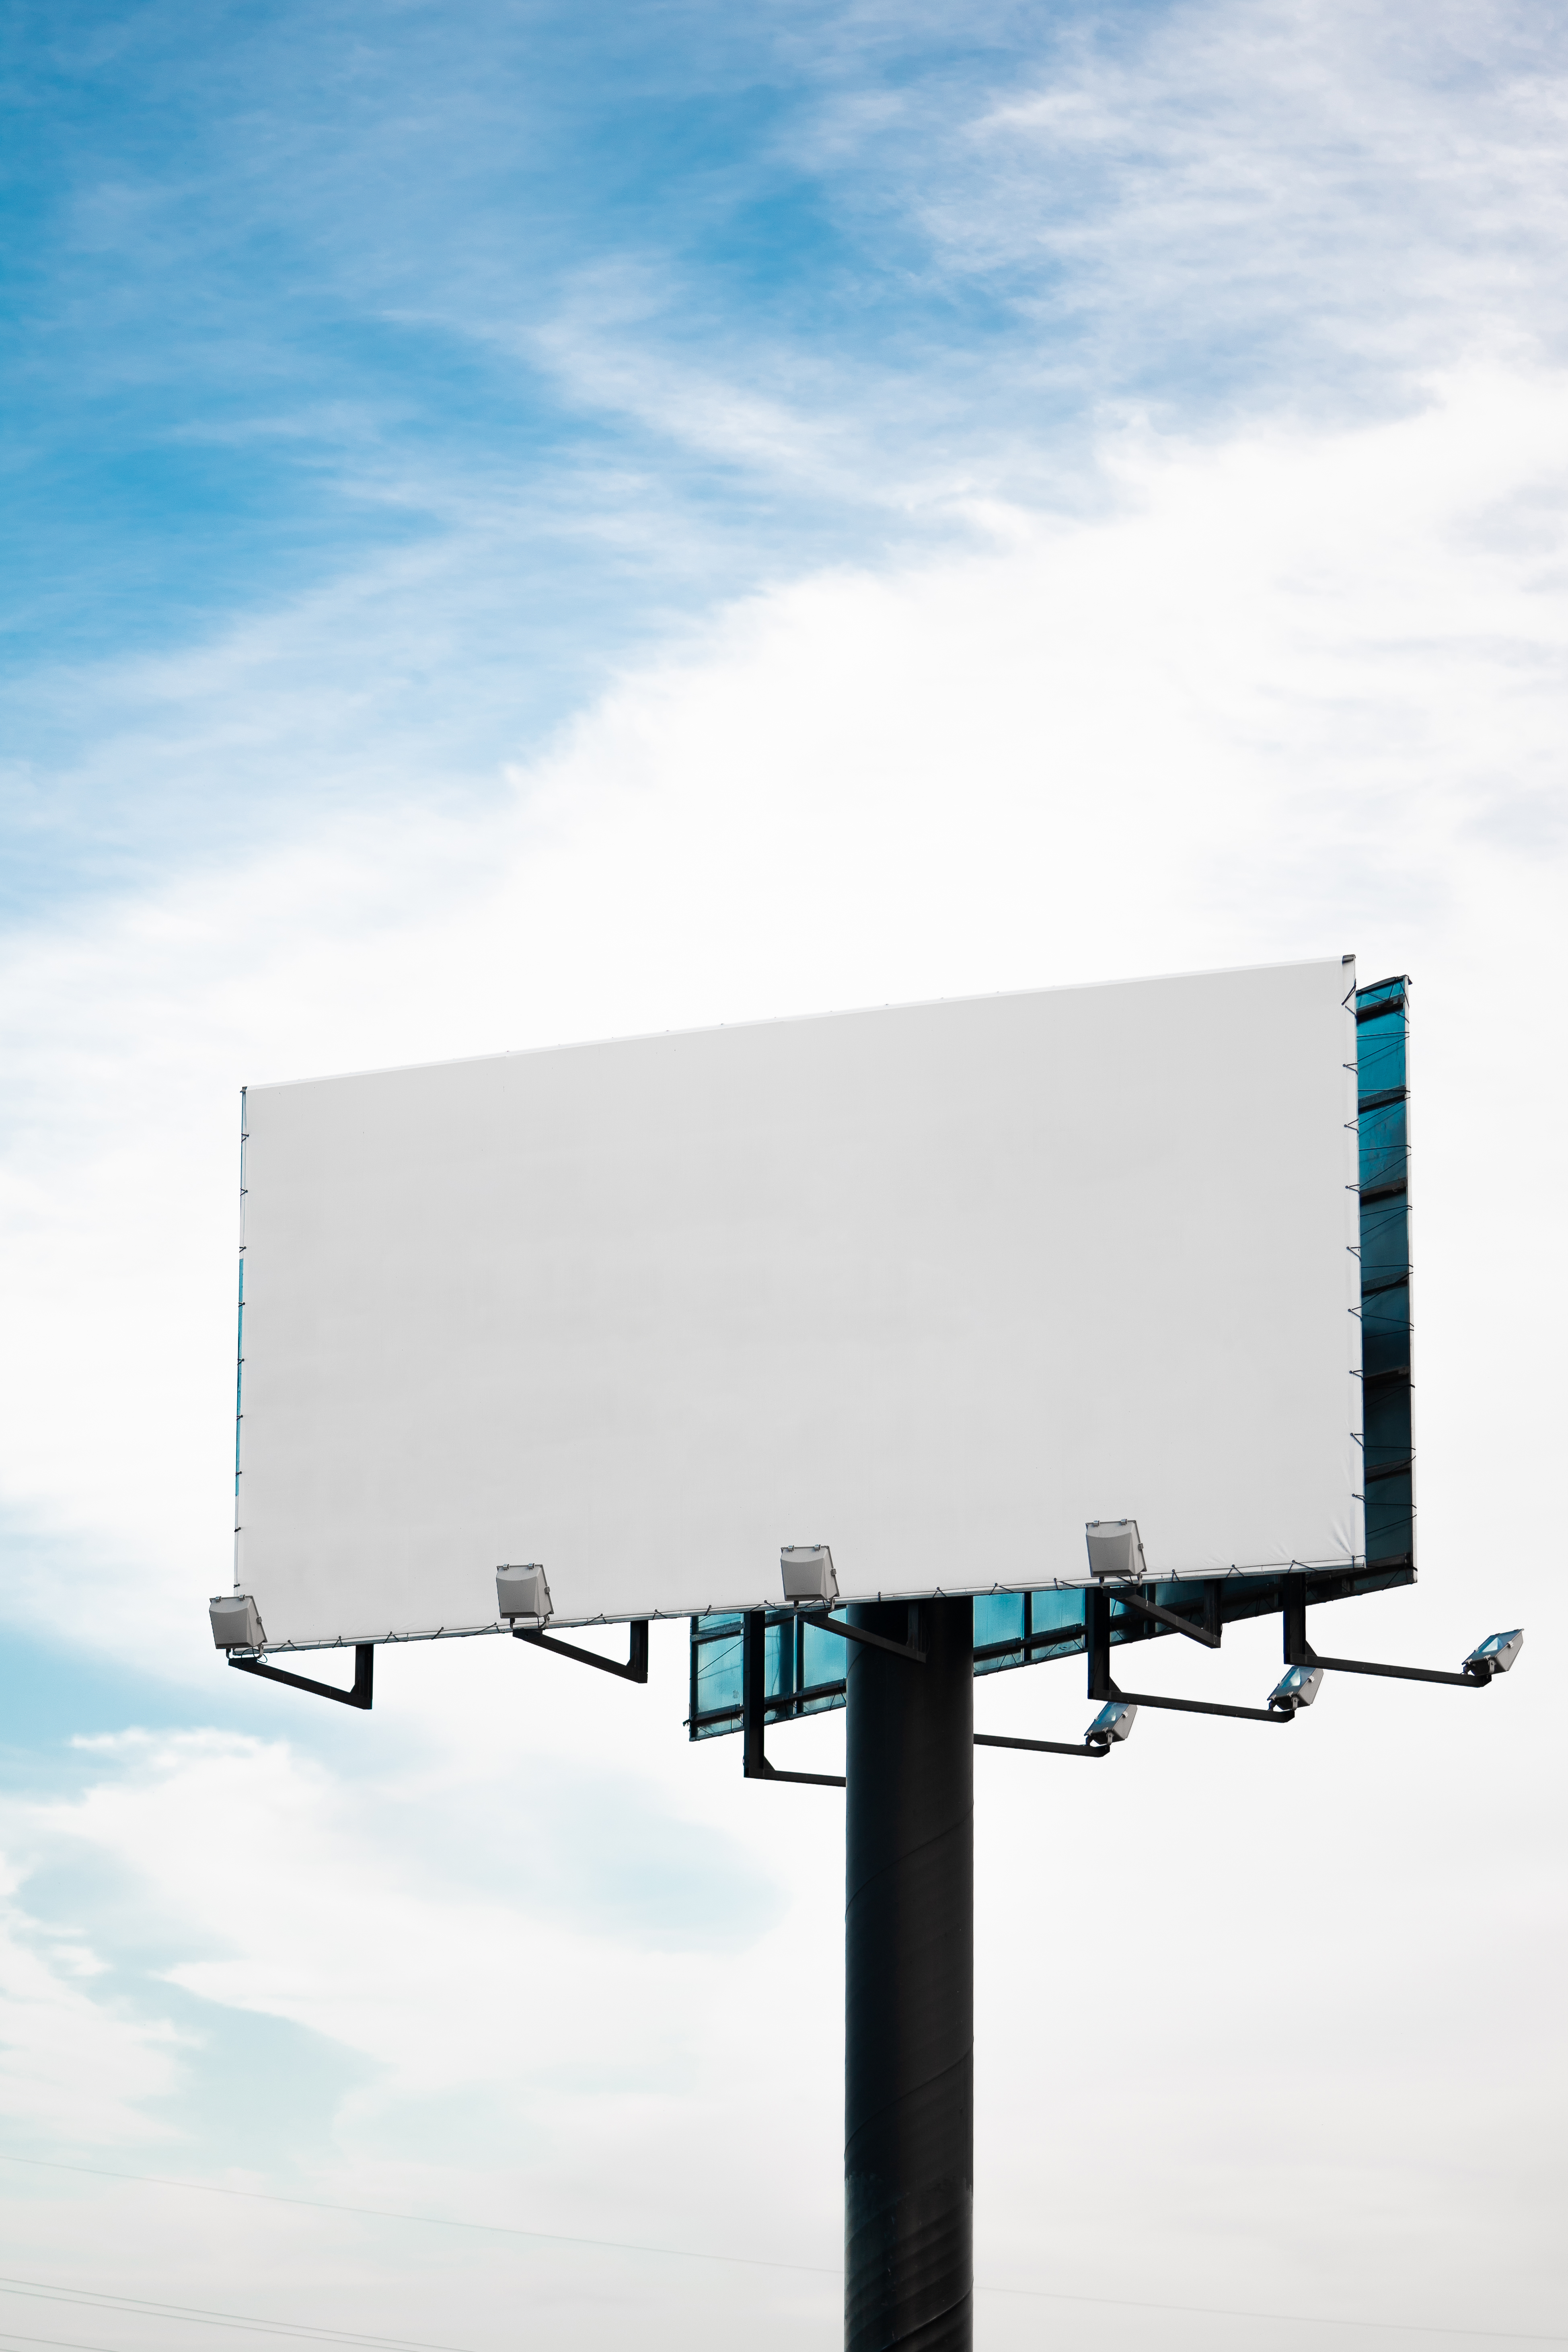 Blank Billboard For Advertising With Cloudy Sky Background Free Stock Photo  | picjumbo